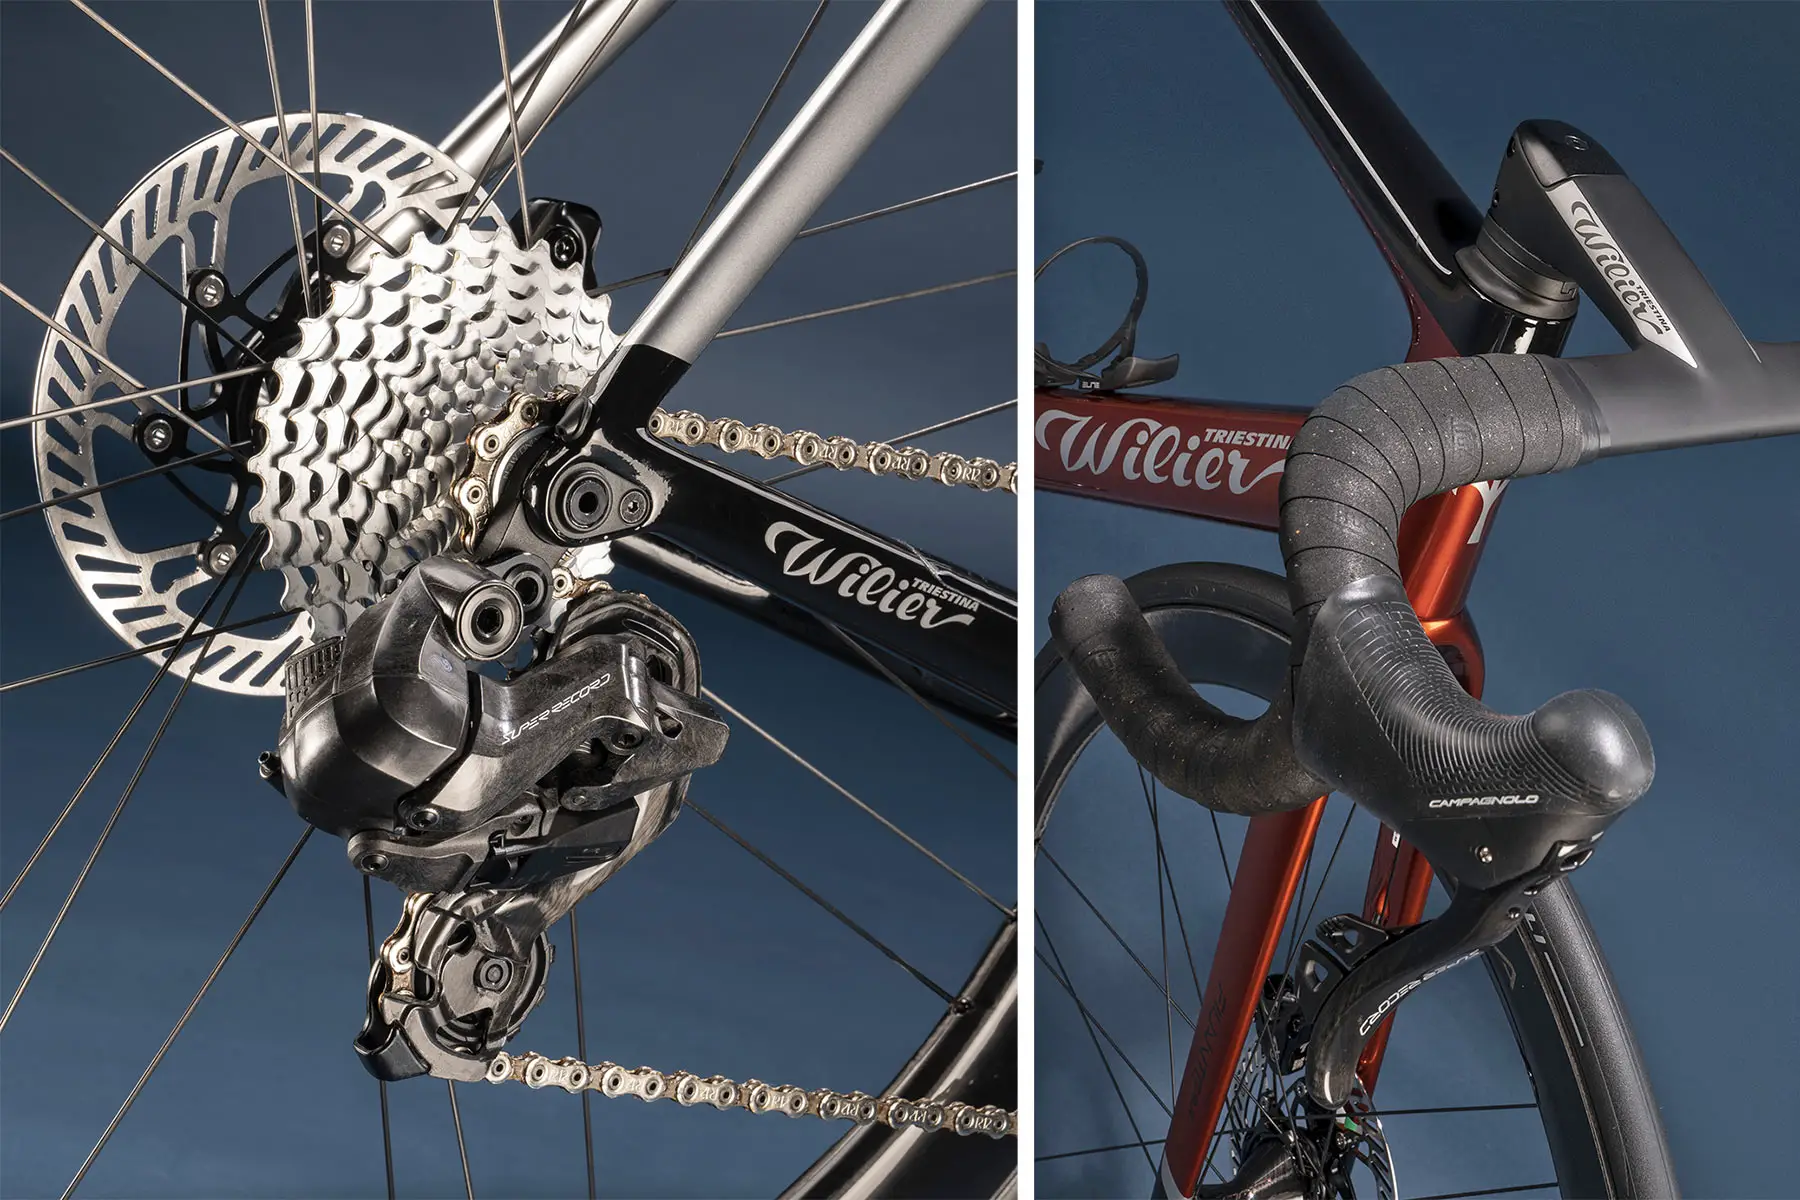 Wilier Filante SLR Ramato edition carbon aero road bike with new Campy Super Record Wireless 12sp groupset details